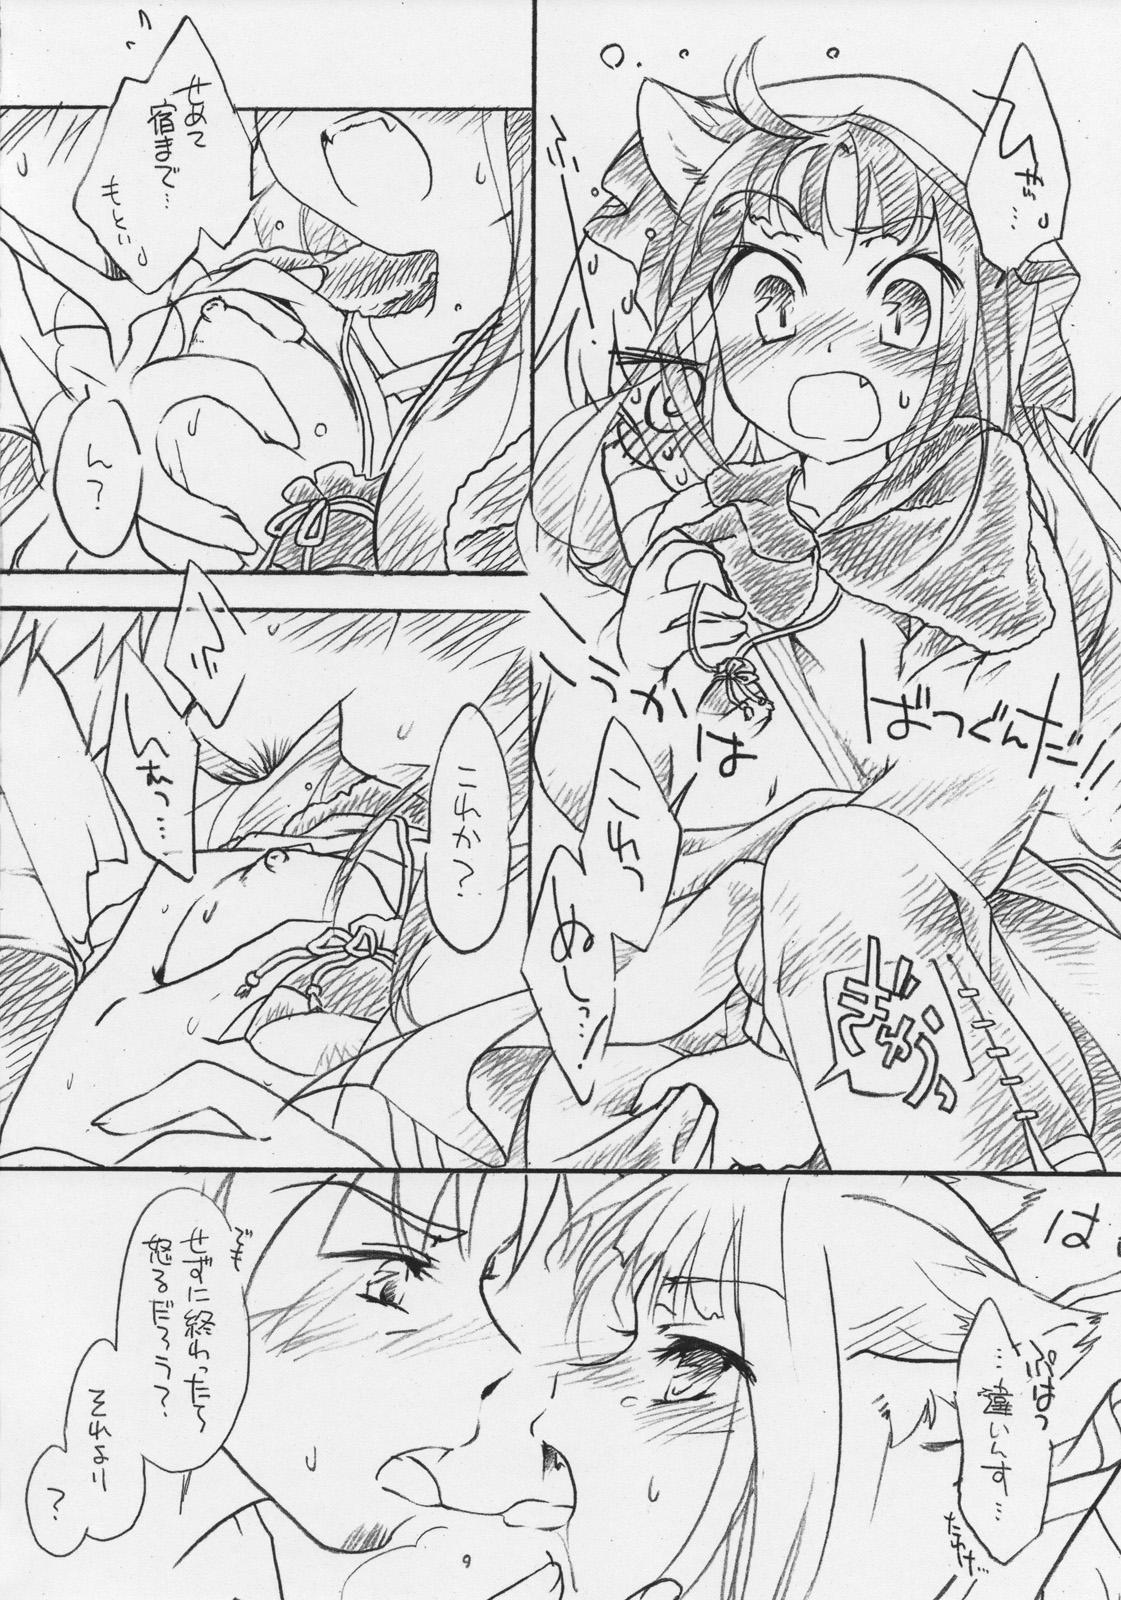 Whores Okami to Bureikou - Spice and wolf Ass Licking - Page 3